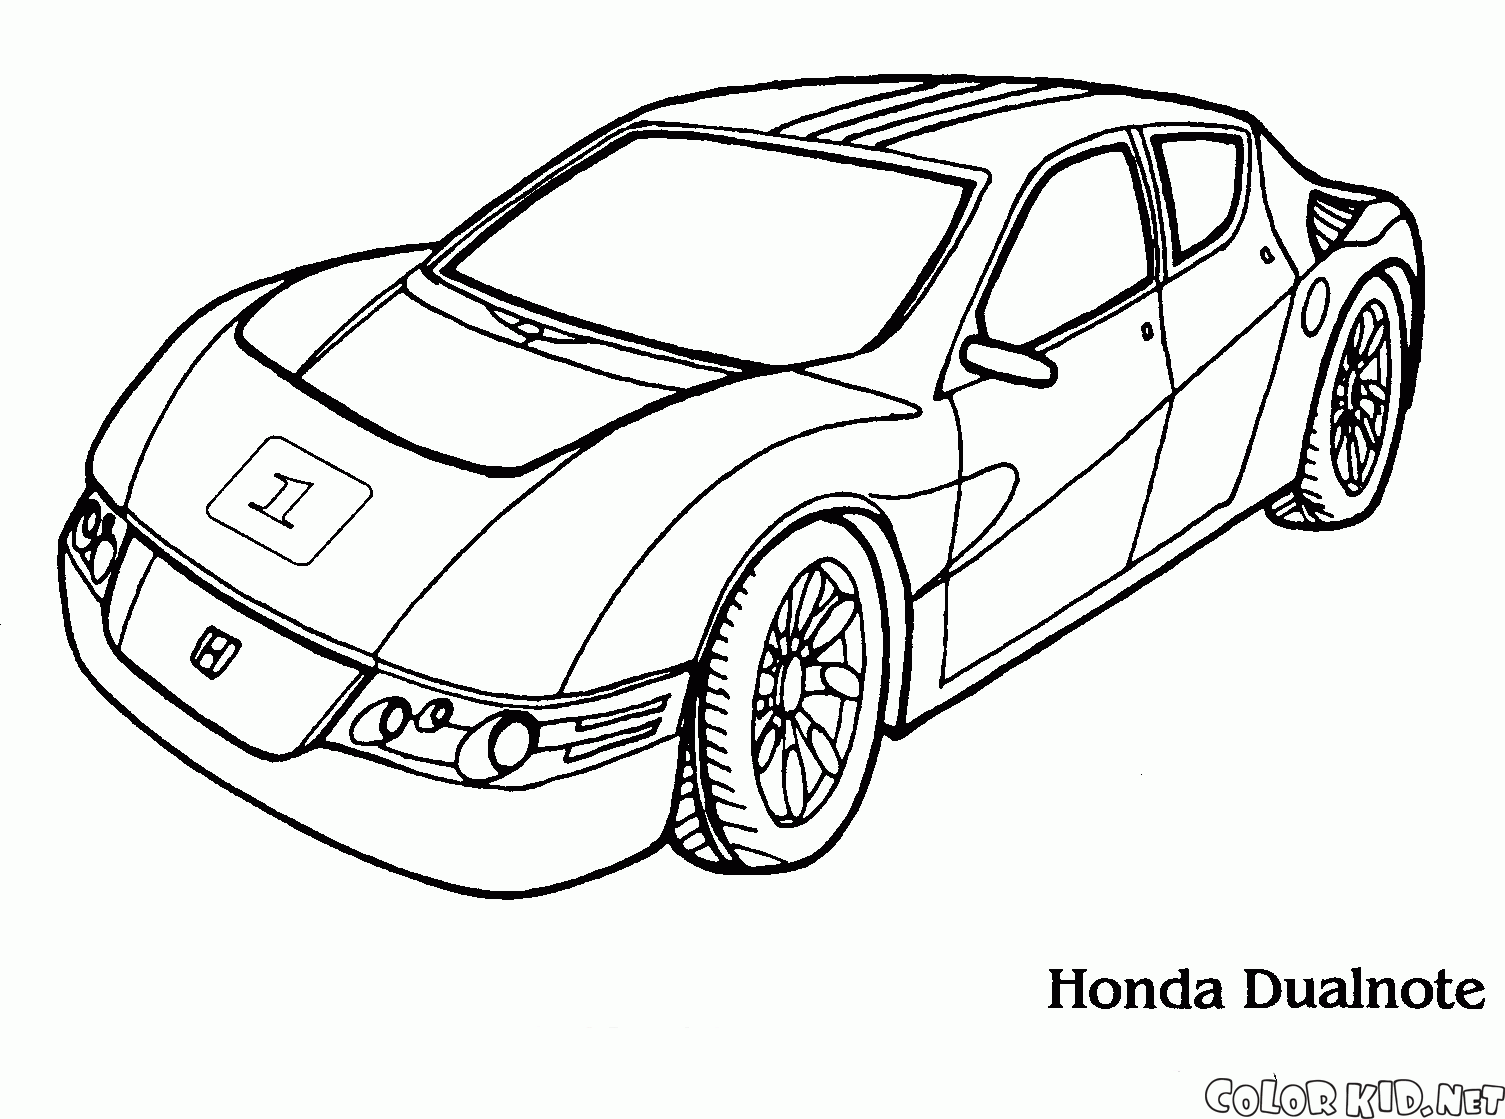 Coloring page - Honda Dialnot